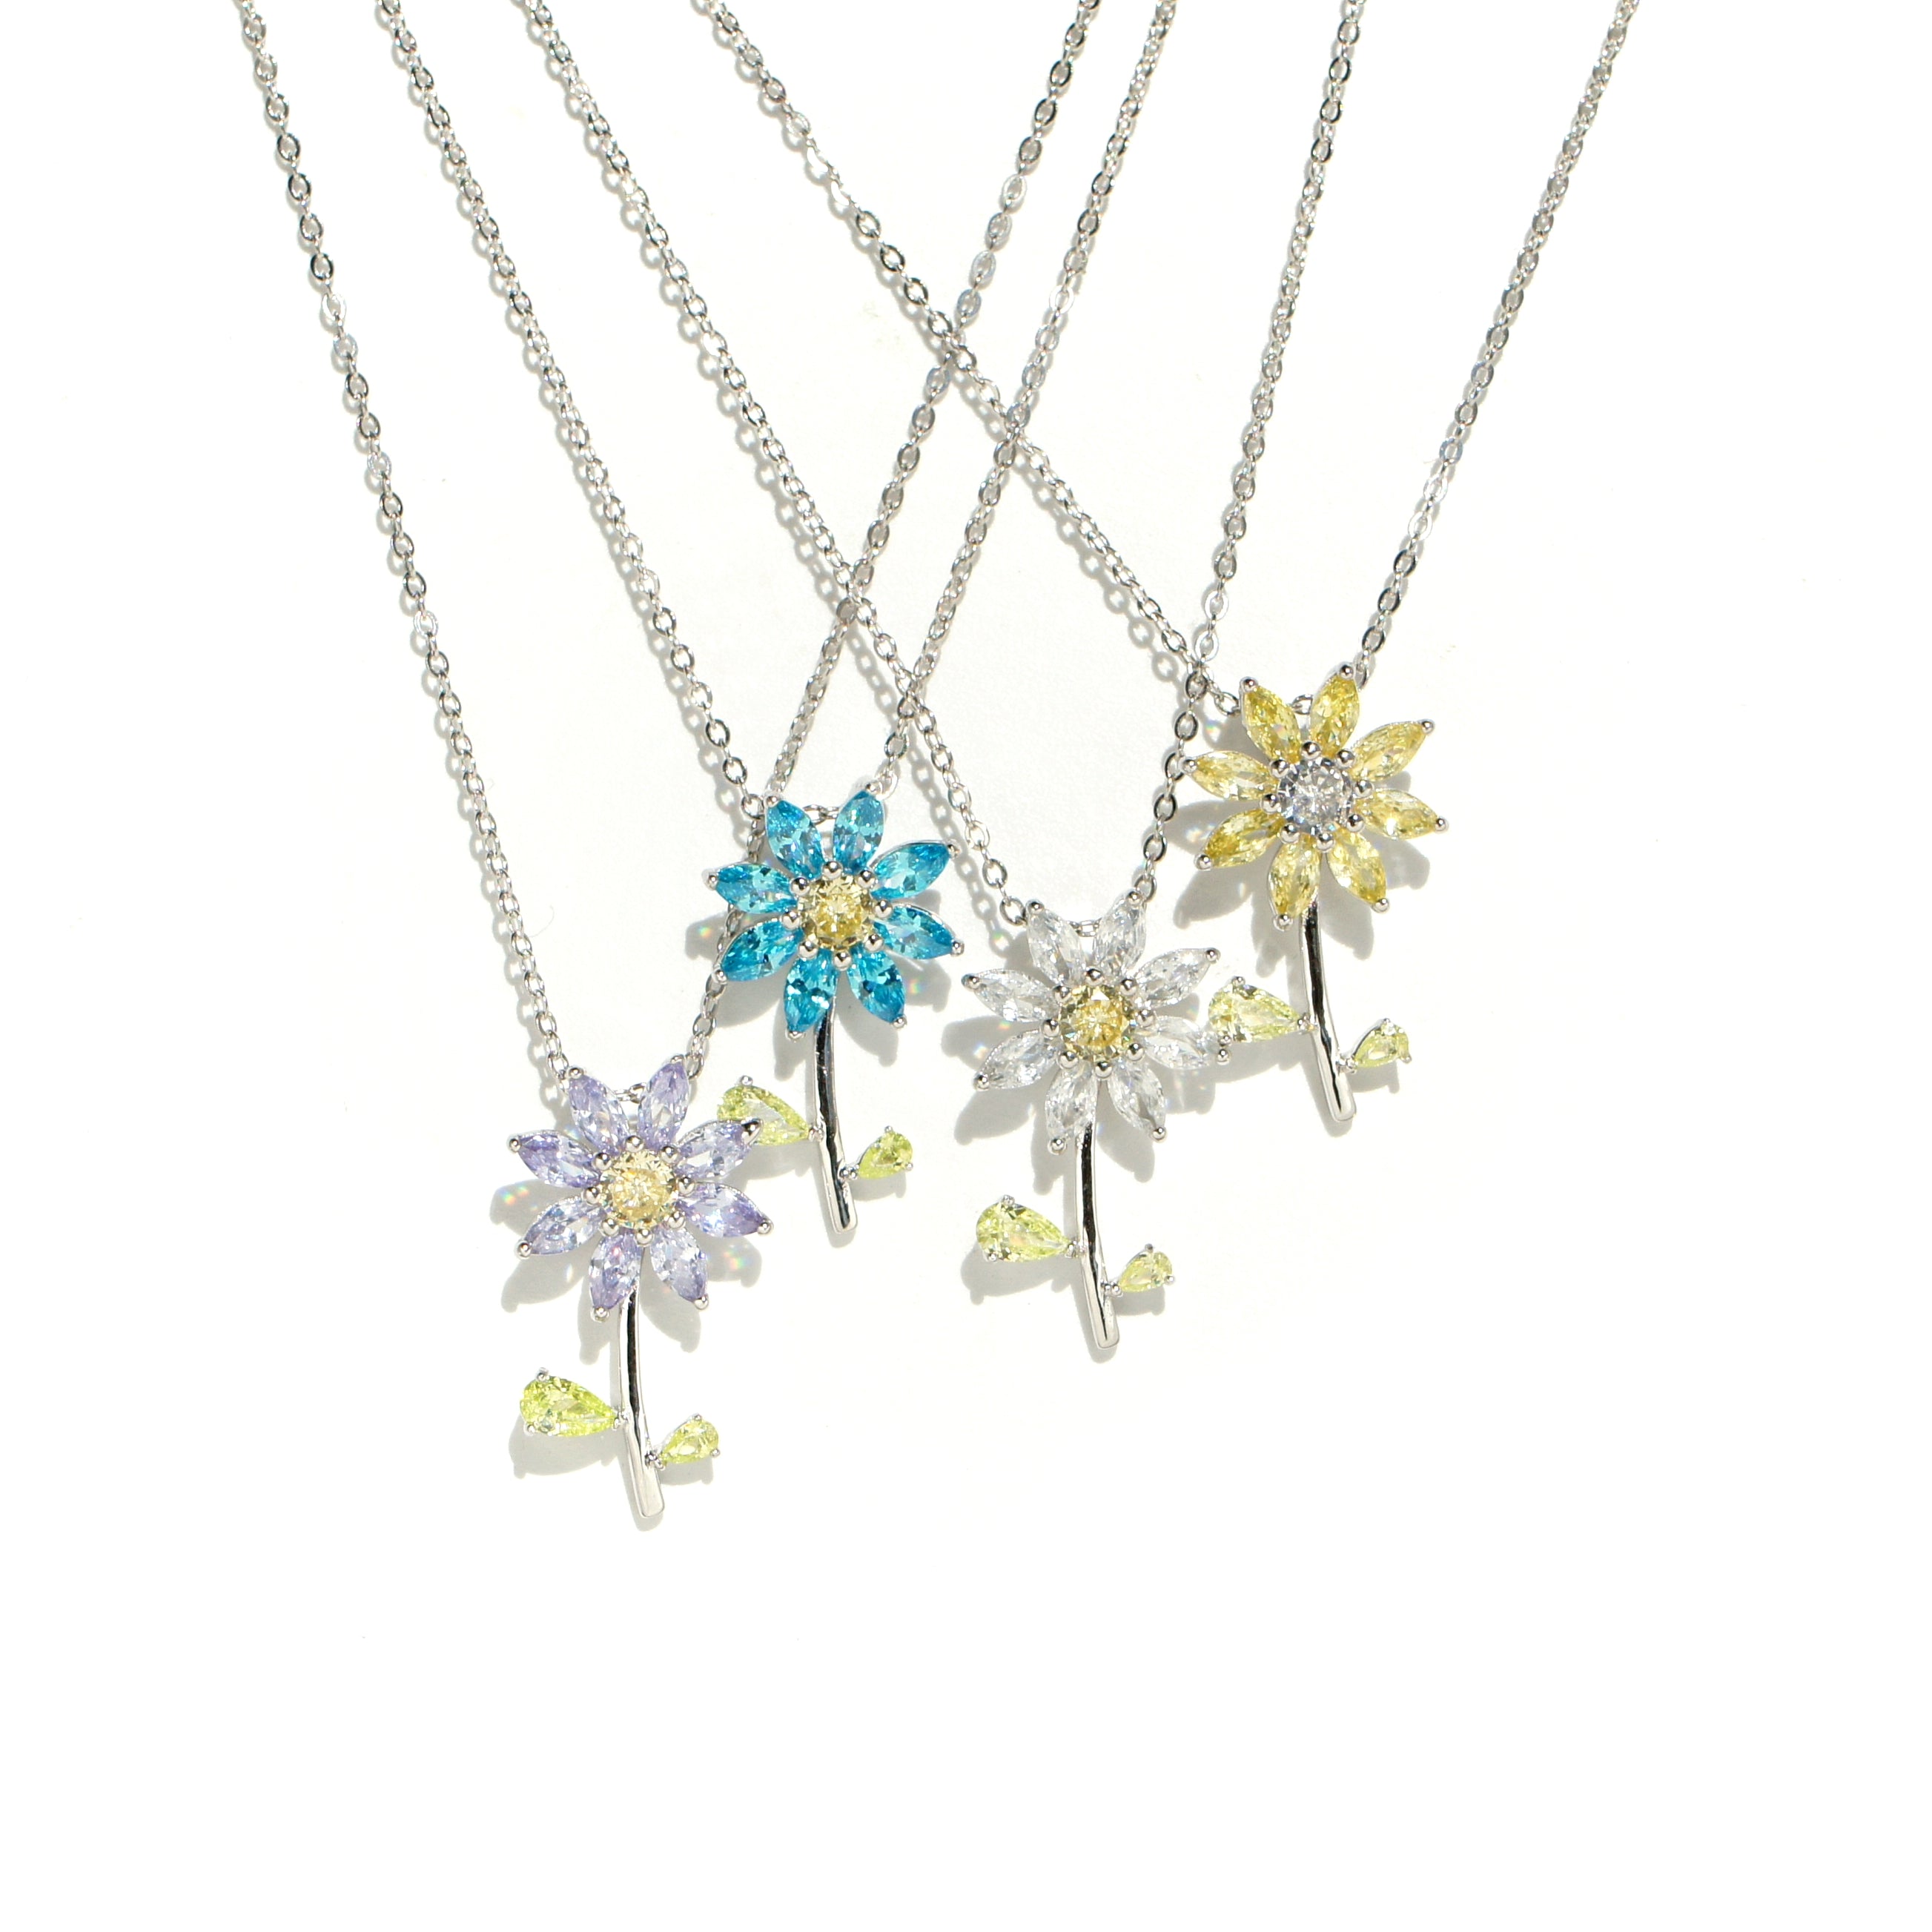 Reborn Crystal Daisy Pendant Necklace, Sterling Silver